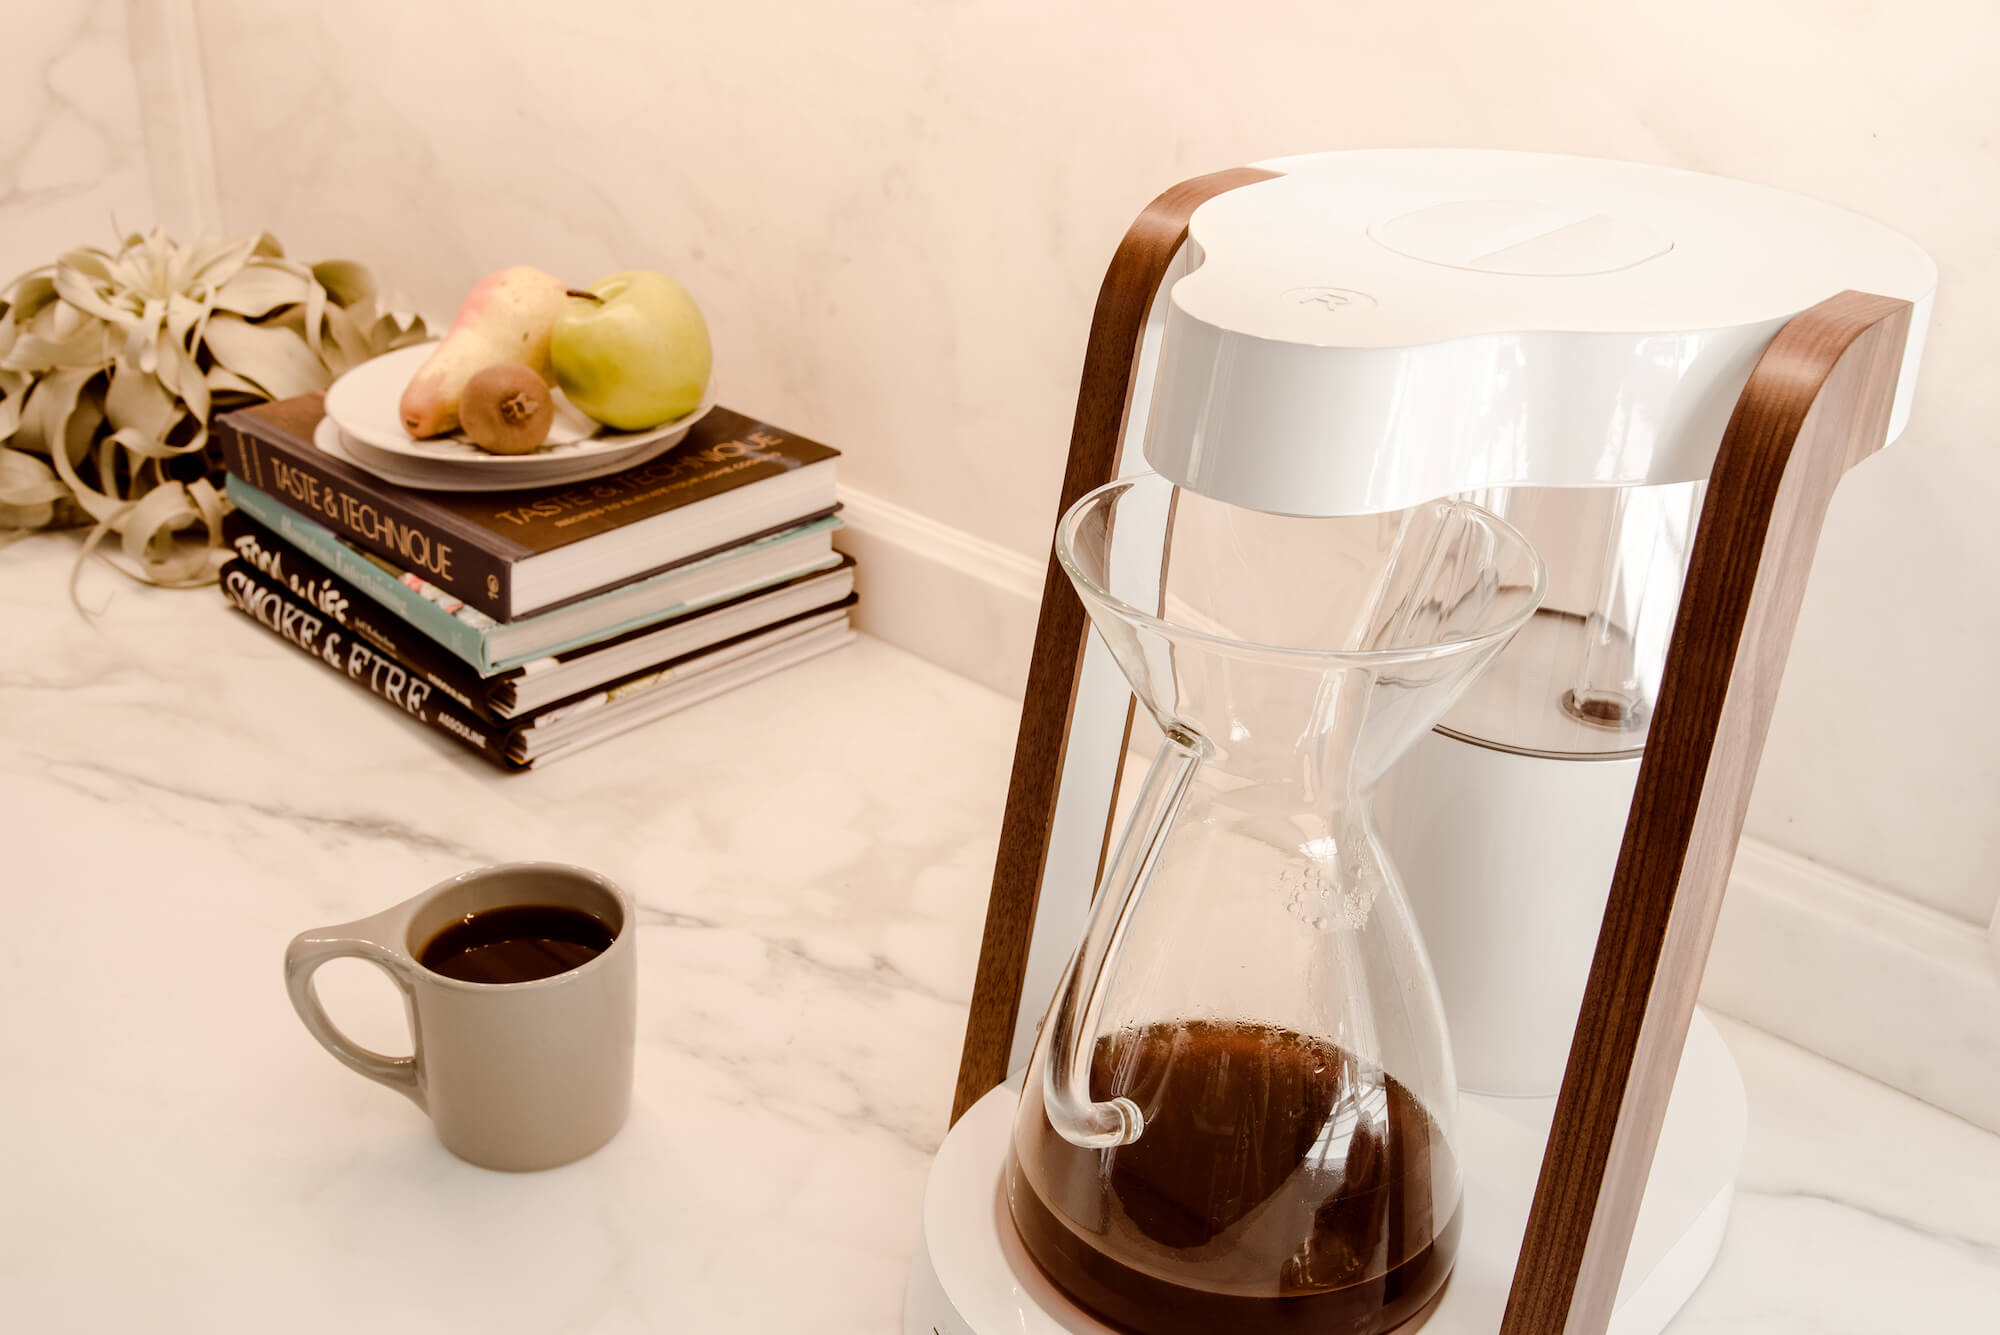 Ratio Eight - Automatic Pour-Over Coffee Machine